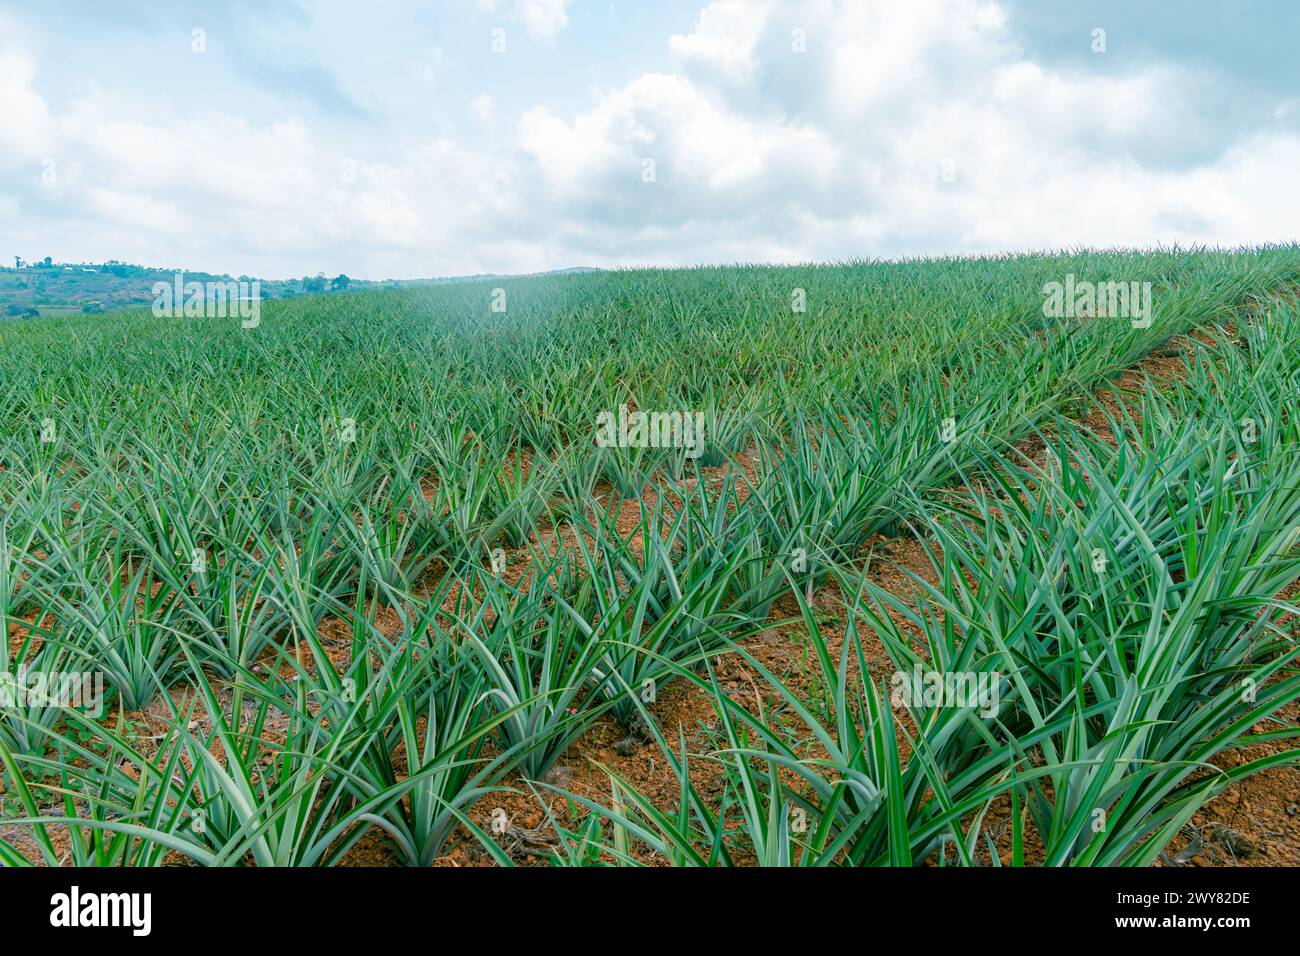 Pineapple plantation in Colombia, Gold Honey variety (Ananas comosus) Stock Photo